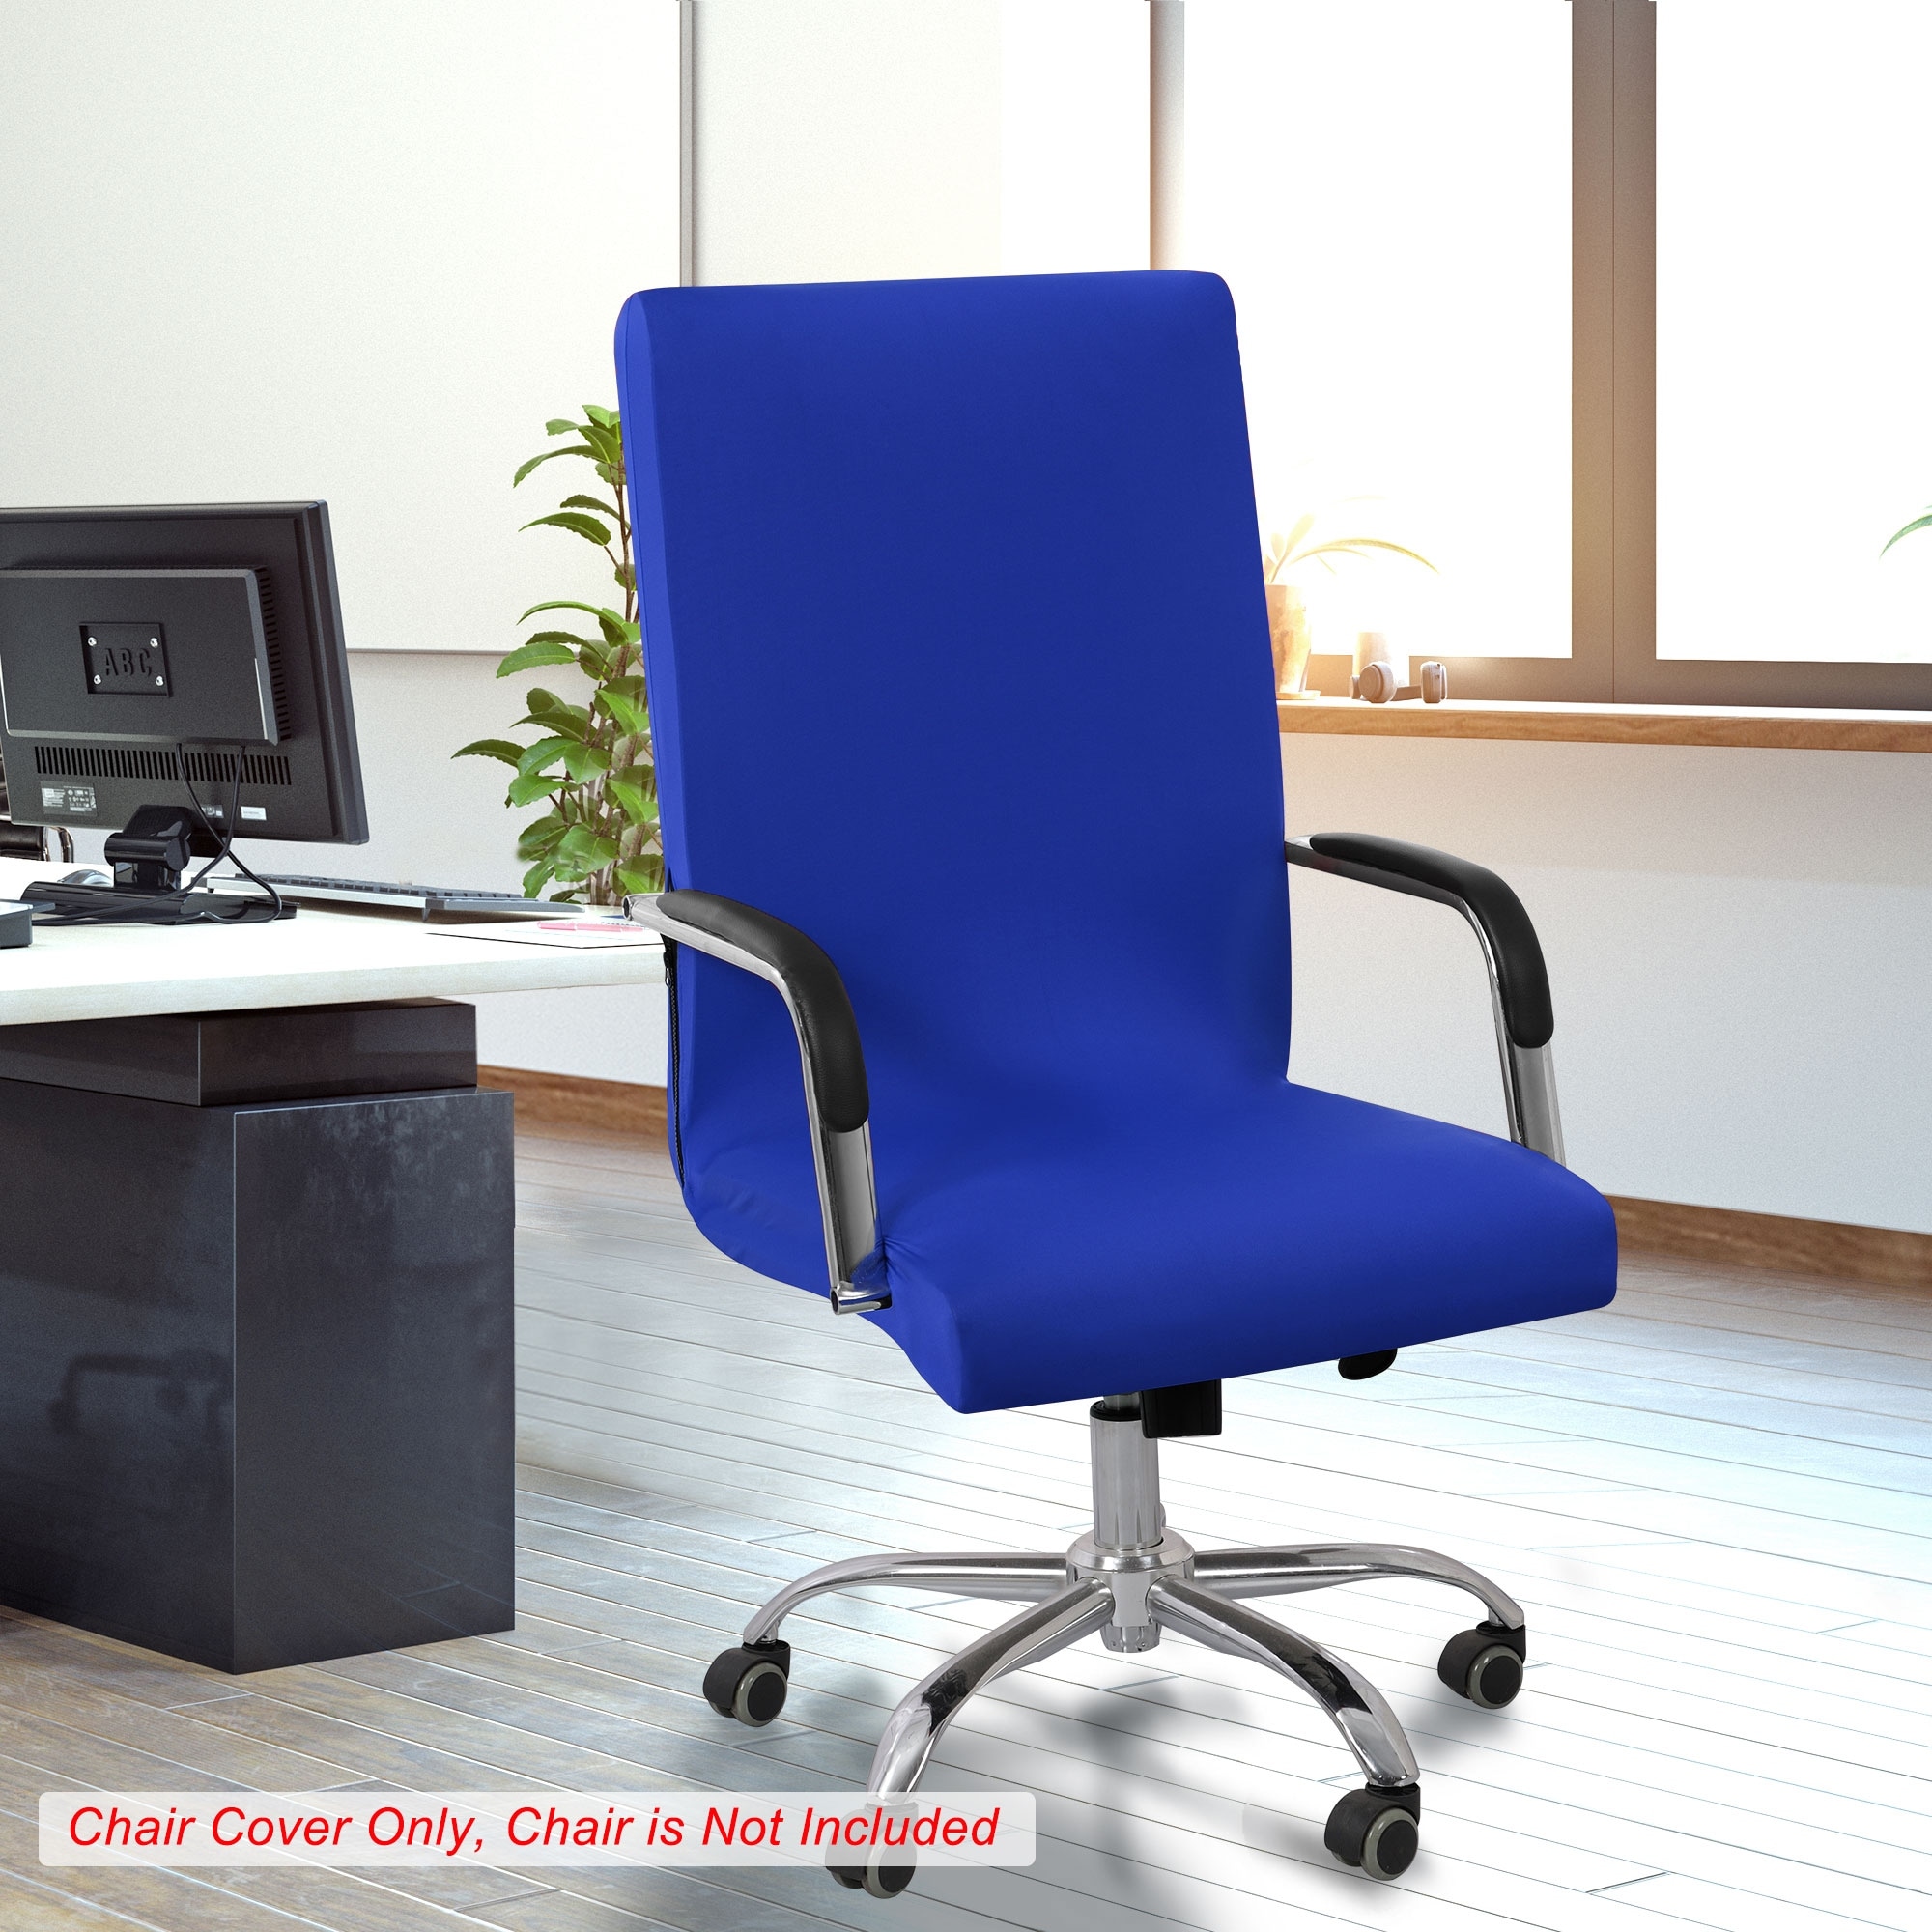 Details about   Swivel Computer Chair Cover Stretch Remove Office Armchair Slipcover Seat USA ❤ 